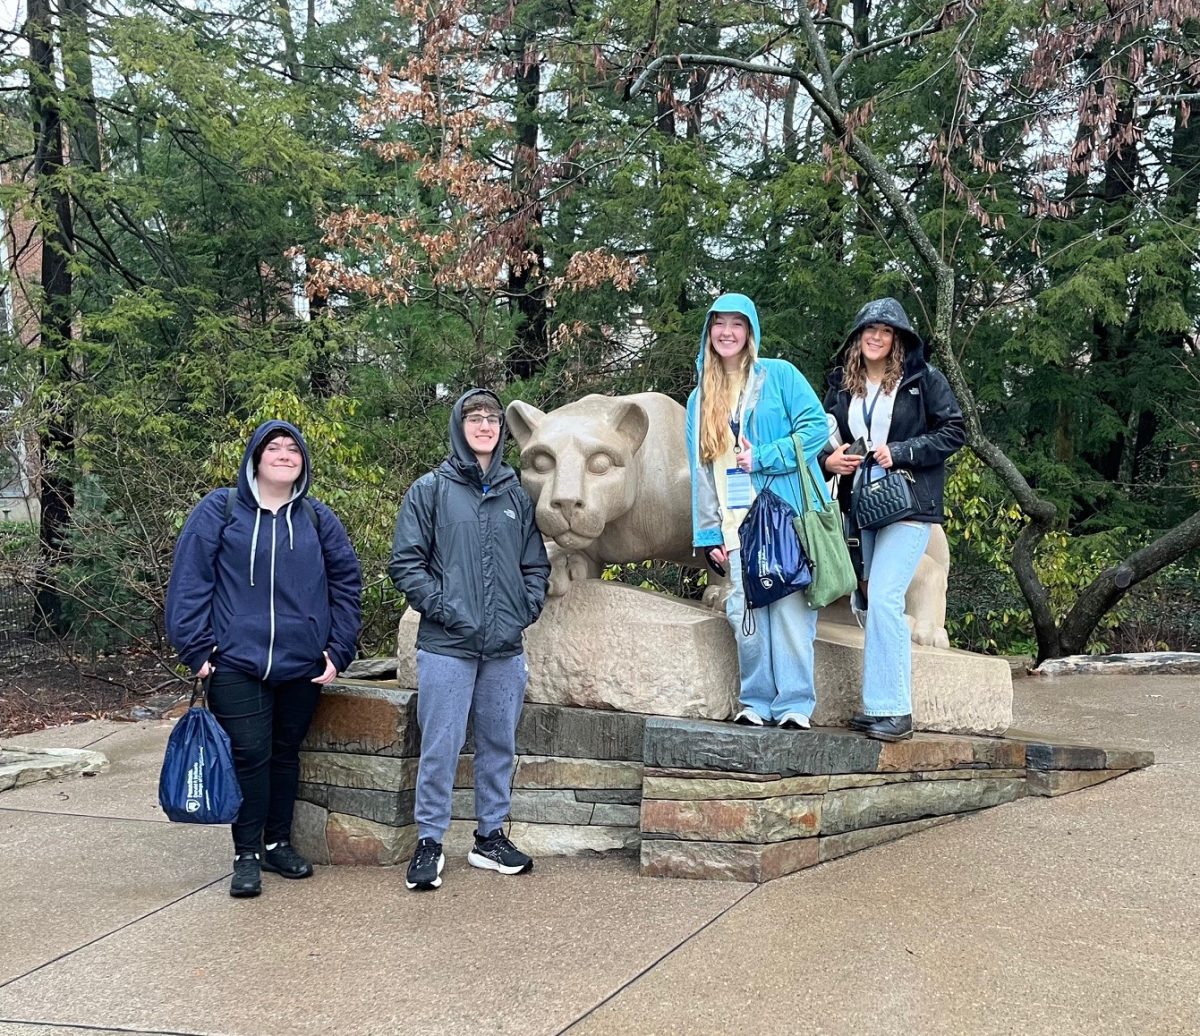 Abi Eckenrod, Jordan Hescox, Olivia Hess, and Chloe Brown pose at the Nittany Lion shrine at Penn State University. The students were on campus last week for the PSPA state journalism contest.